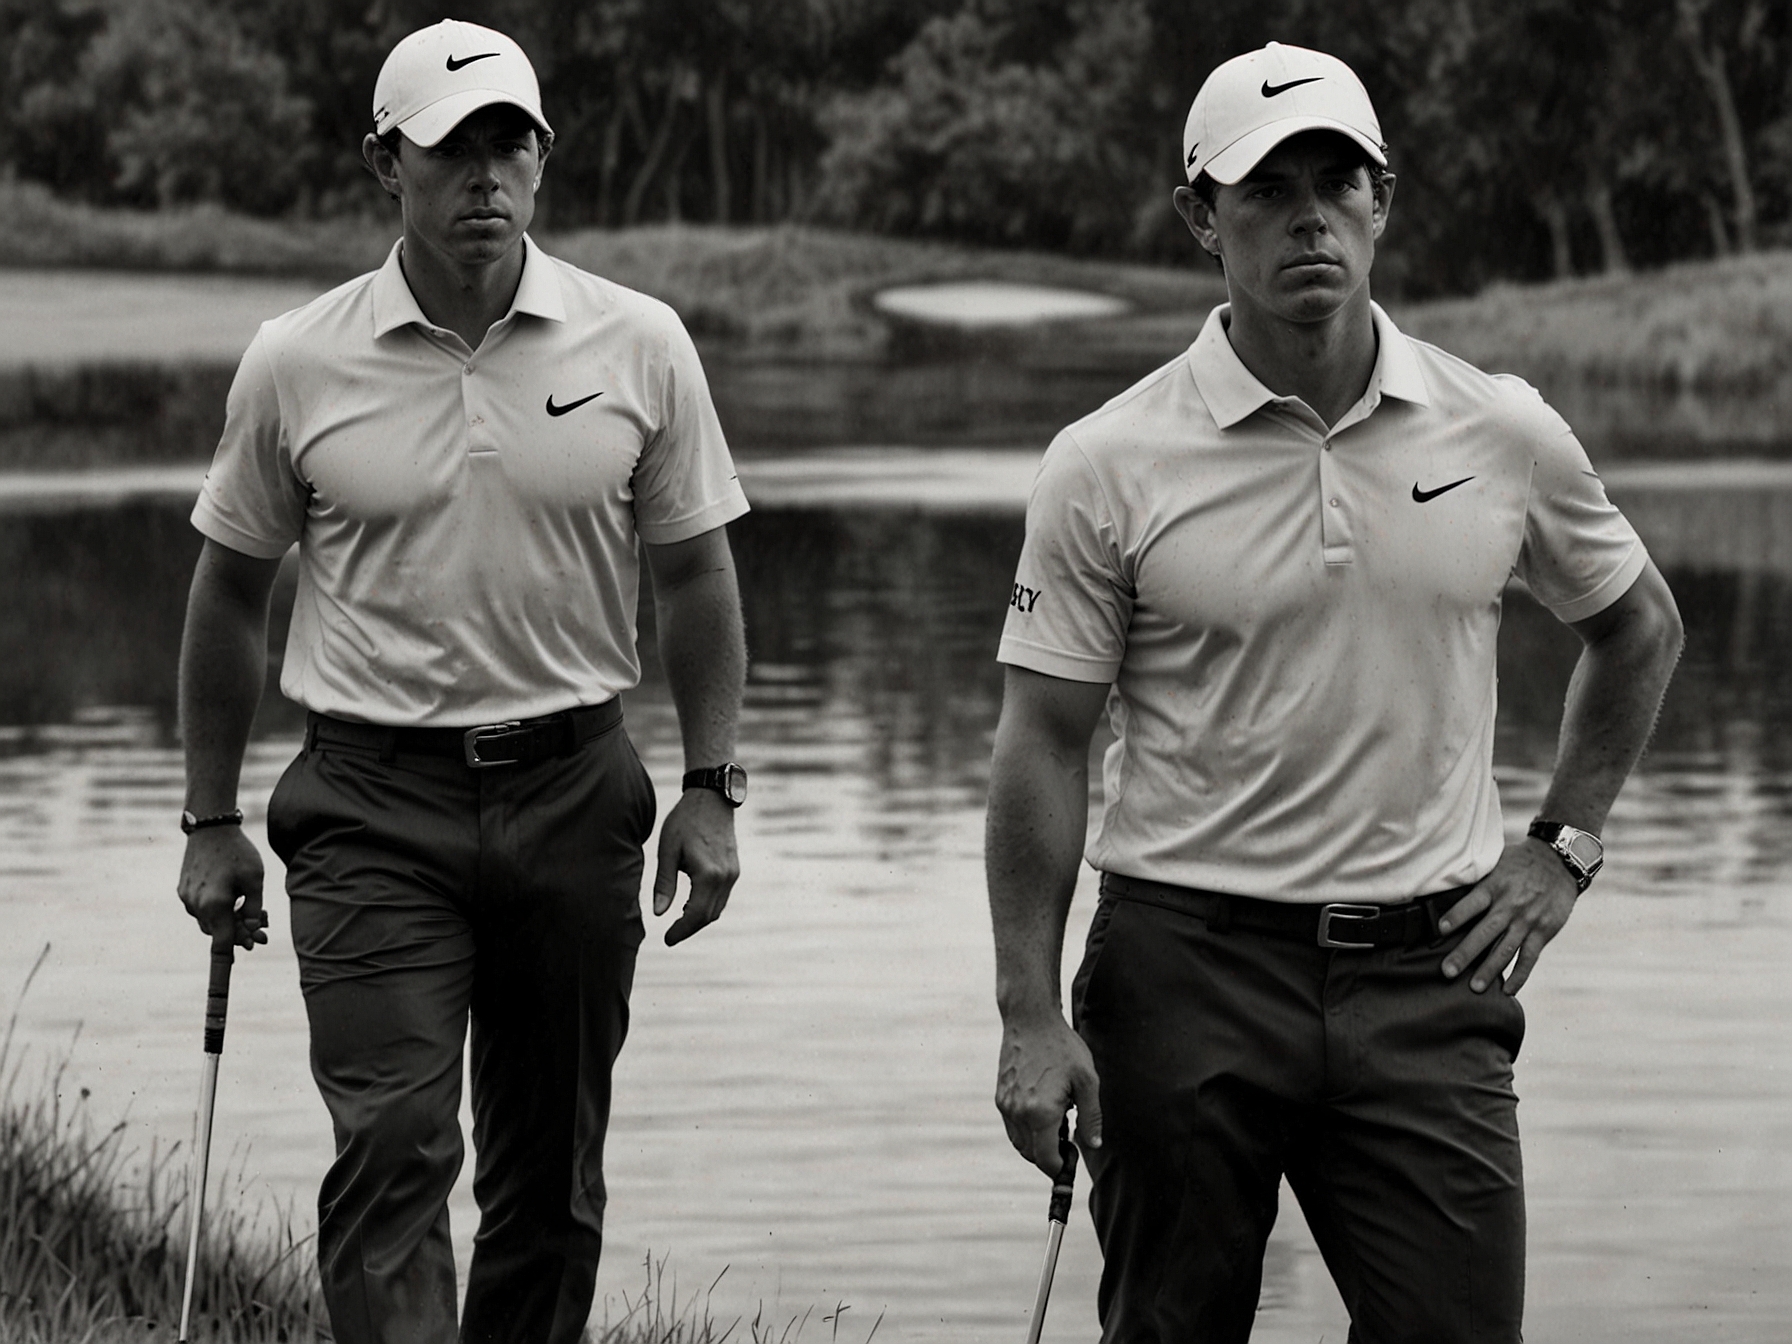 Rory McIlroy looks dejected while standing near the water hazard, with his caddy by his side, reflecting the critical mistakes that cost him the US Open title.